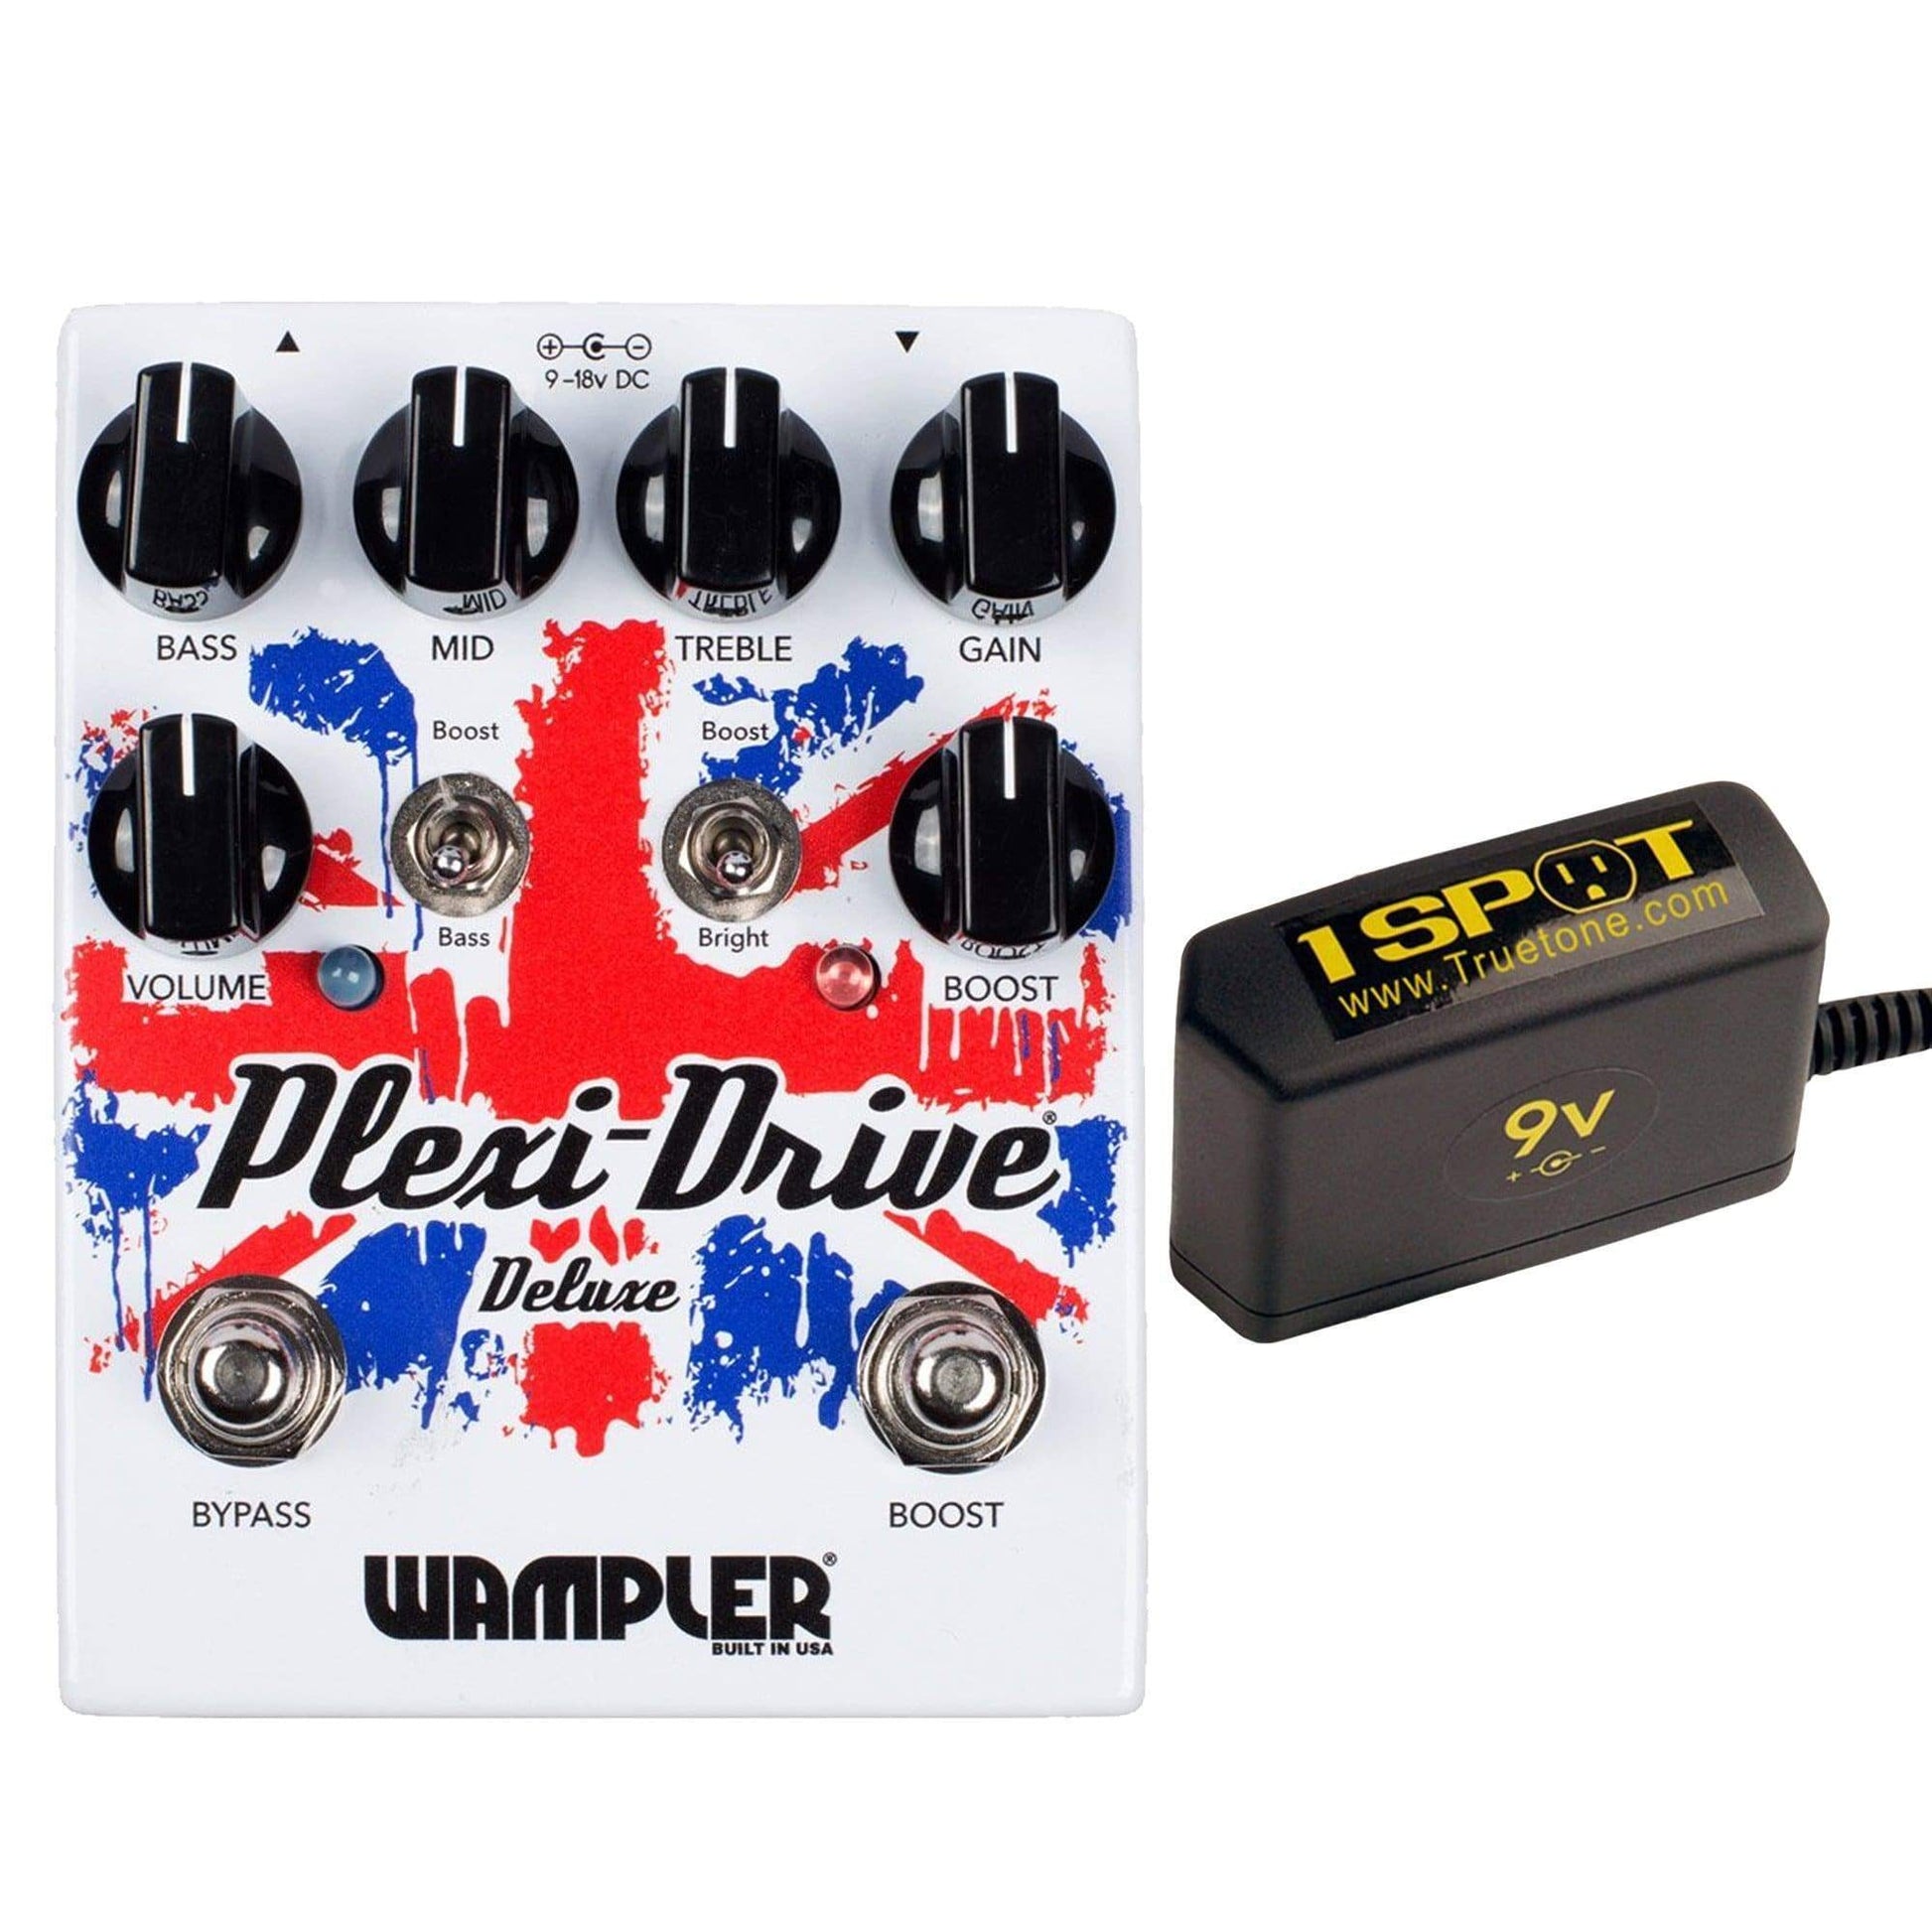 Wampler Plexi Drive Deluxe Bundle w/ Truetone 1 Spot Space Saving 9v Adapter Effects and Pedals / Overdrive and Boost